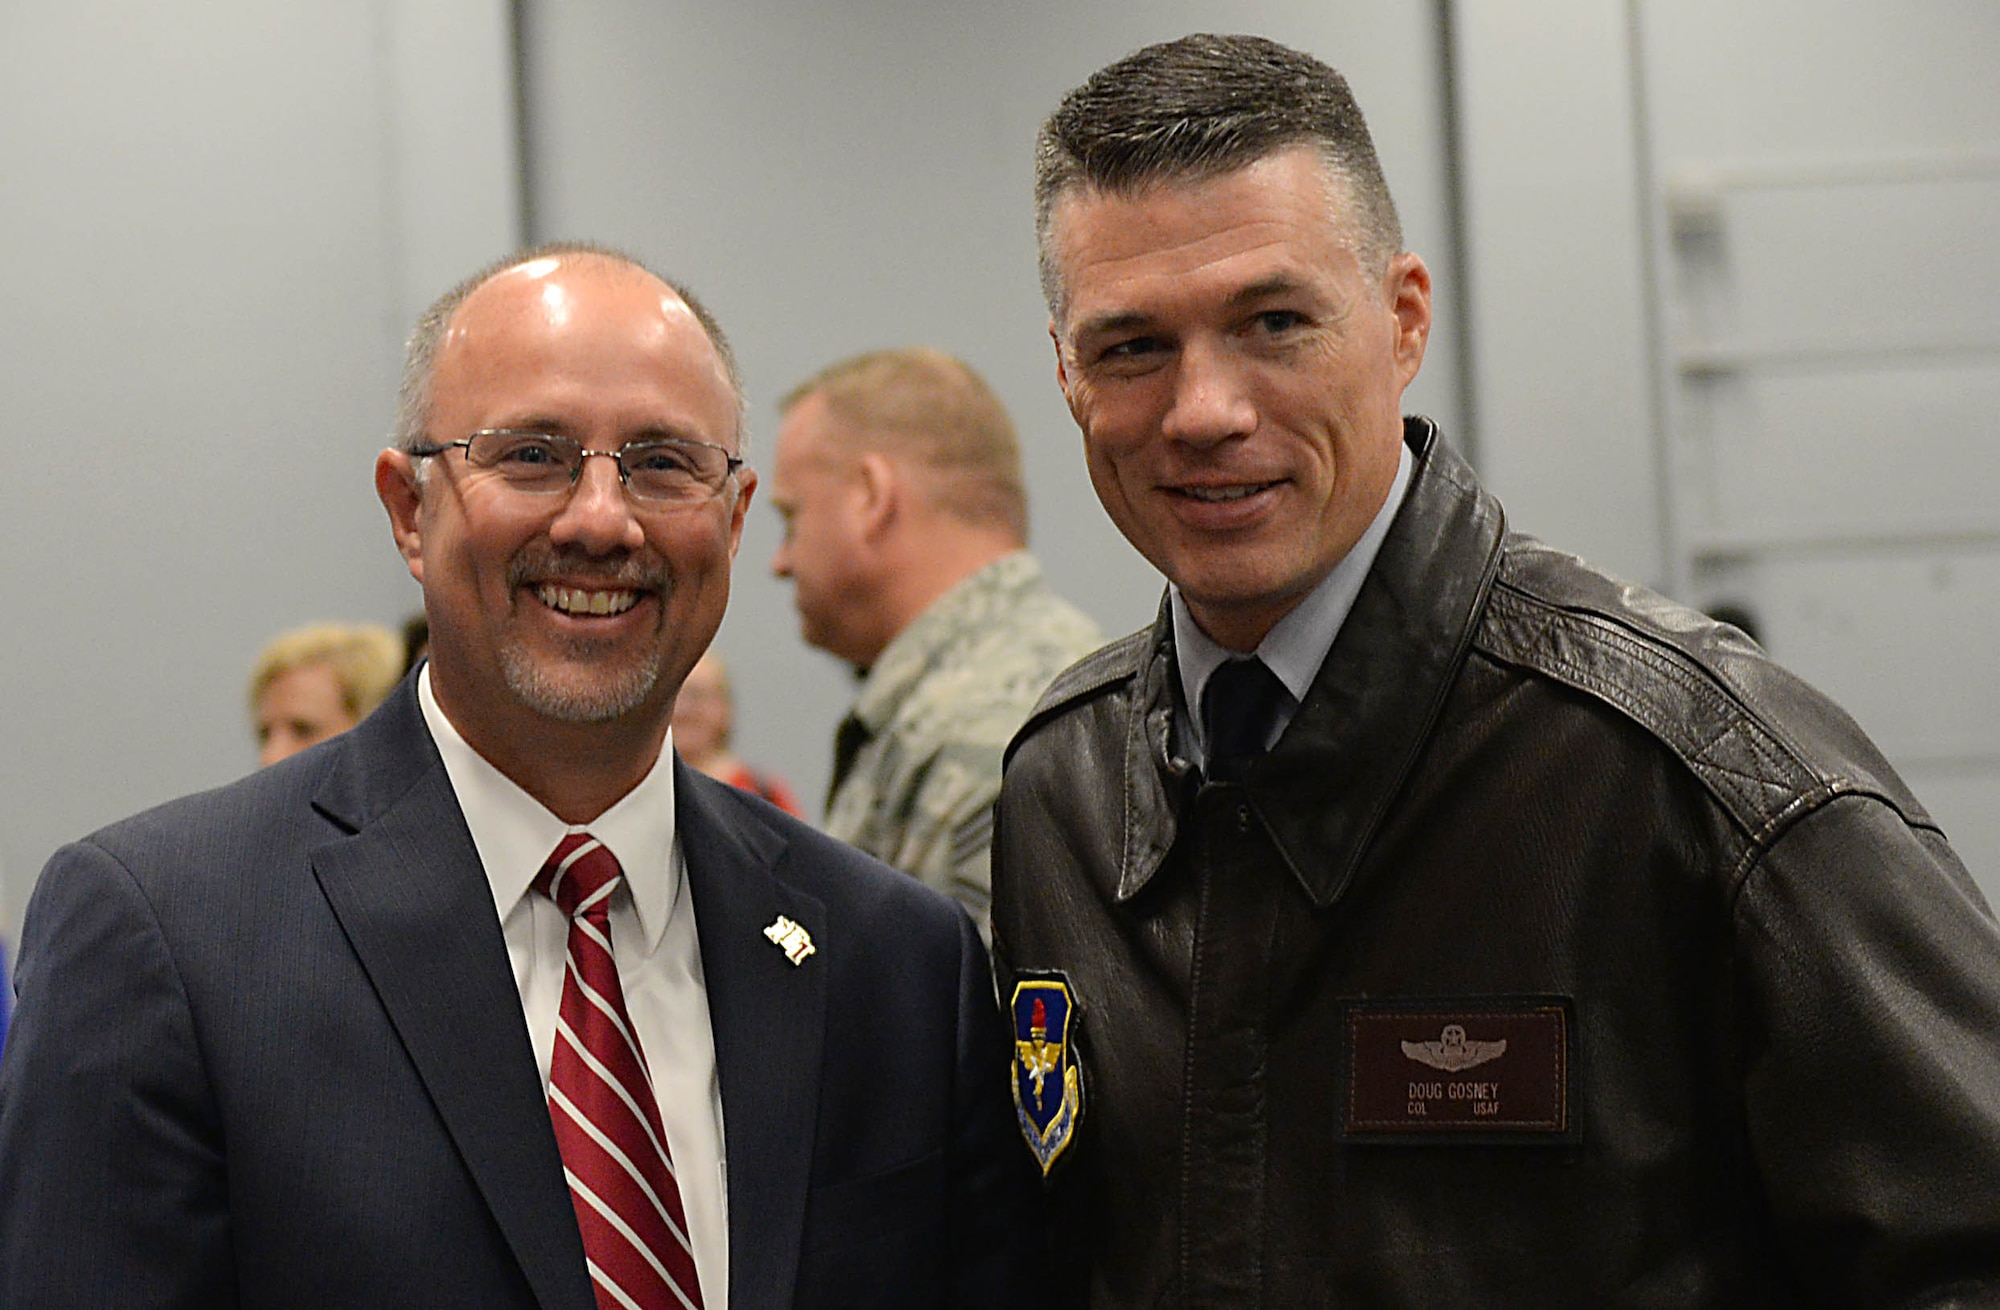 Dr. Thomas Huebner, President of East Mississippi Community College, and Col. Douglas Gosney, 14th Flying Training Wing Commander, talk during the Proud to be an American event Nov. 7, 2017, on the EMCC campus in Mayhew, Mississippi. Gosney spoke about the reasons he is proud to be an American and explained the many types of heroes America has outside of the Department of Defense. (U.S. Air Force photo by Airman 1st Class Keith Holcomb)